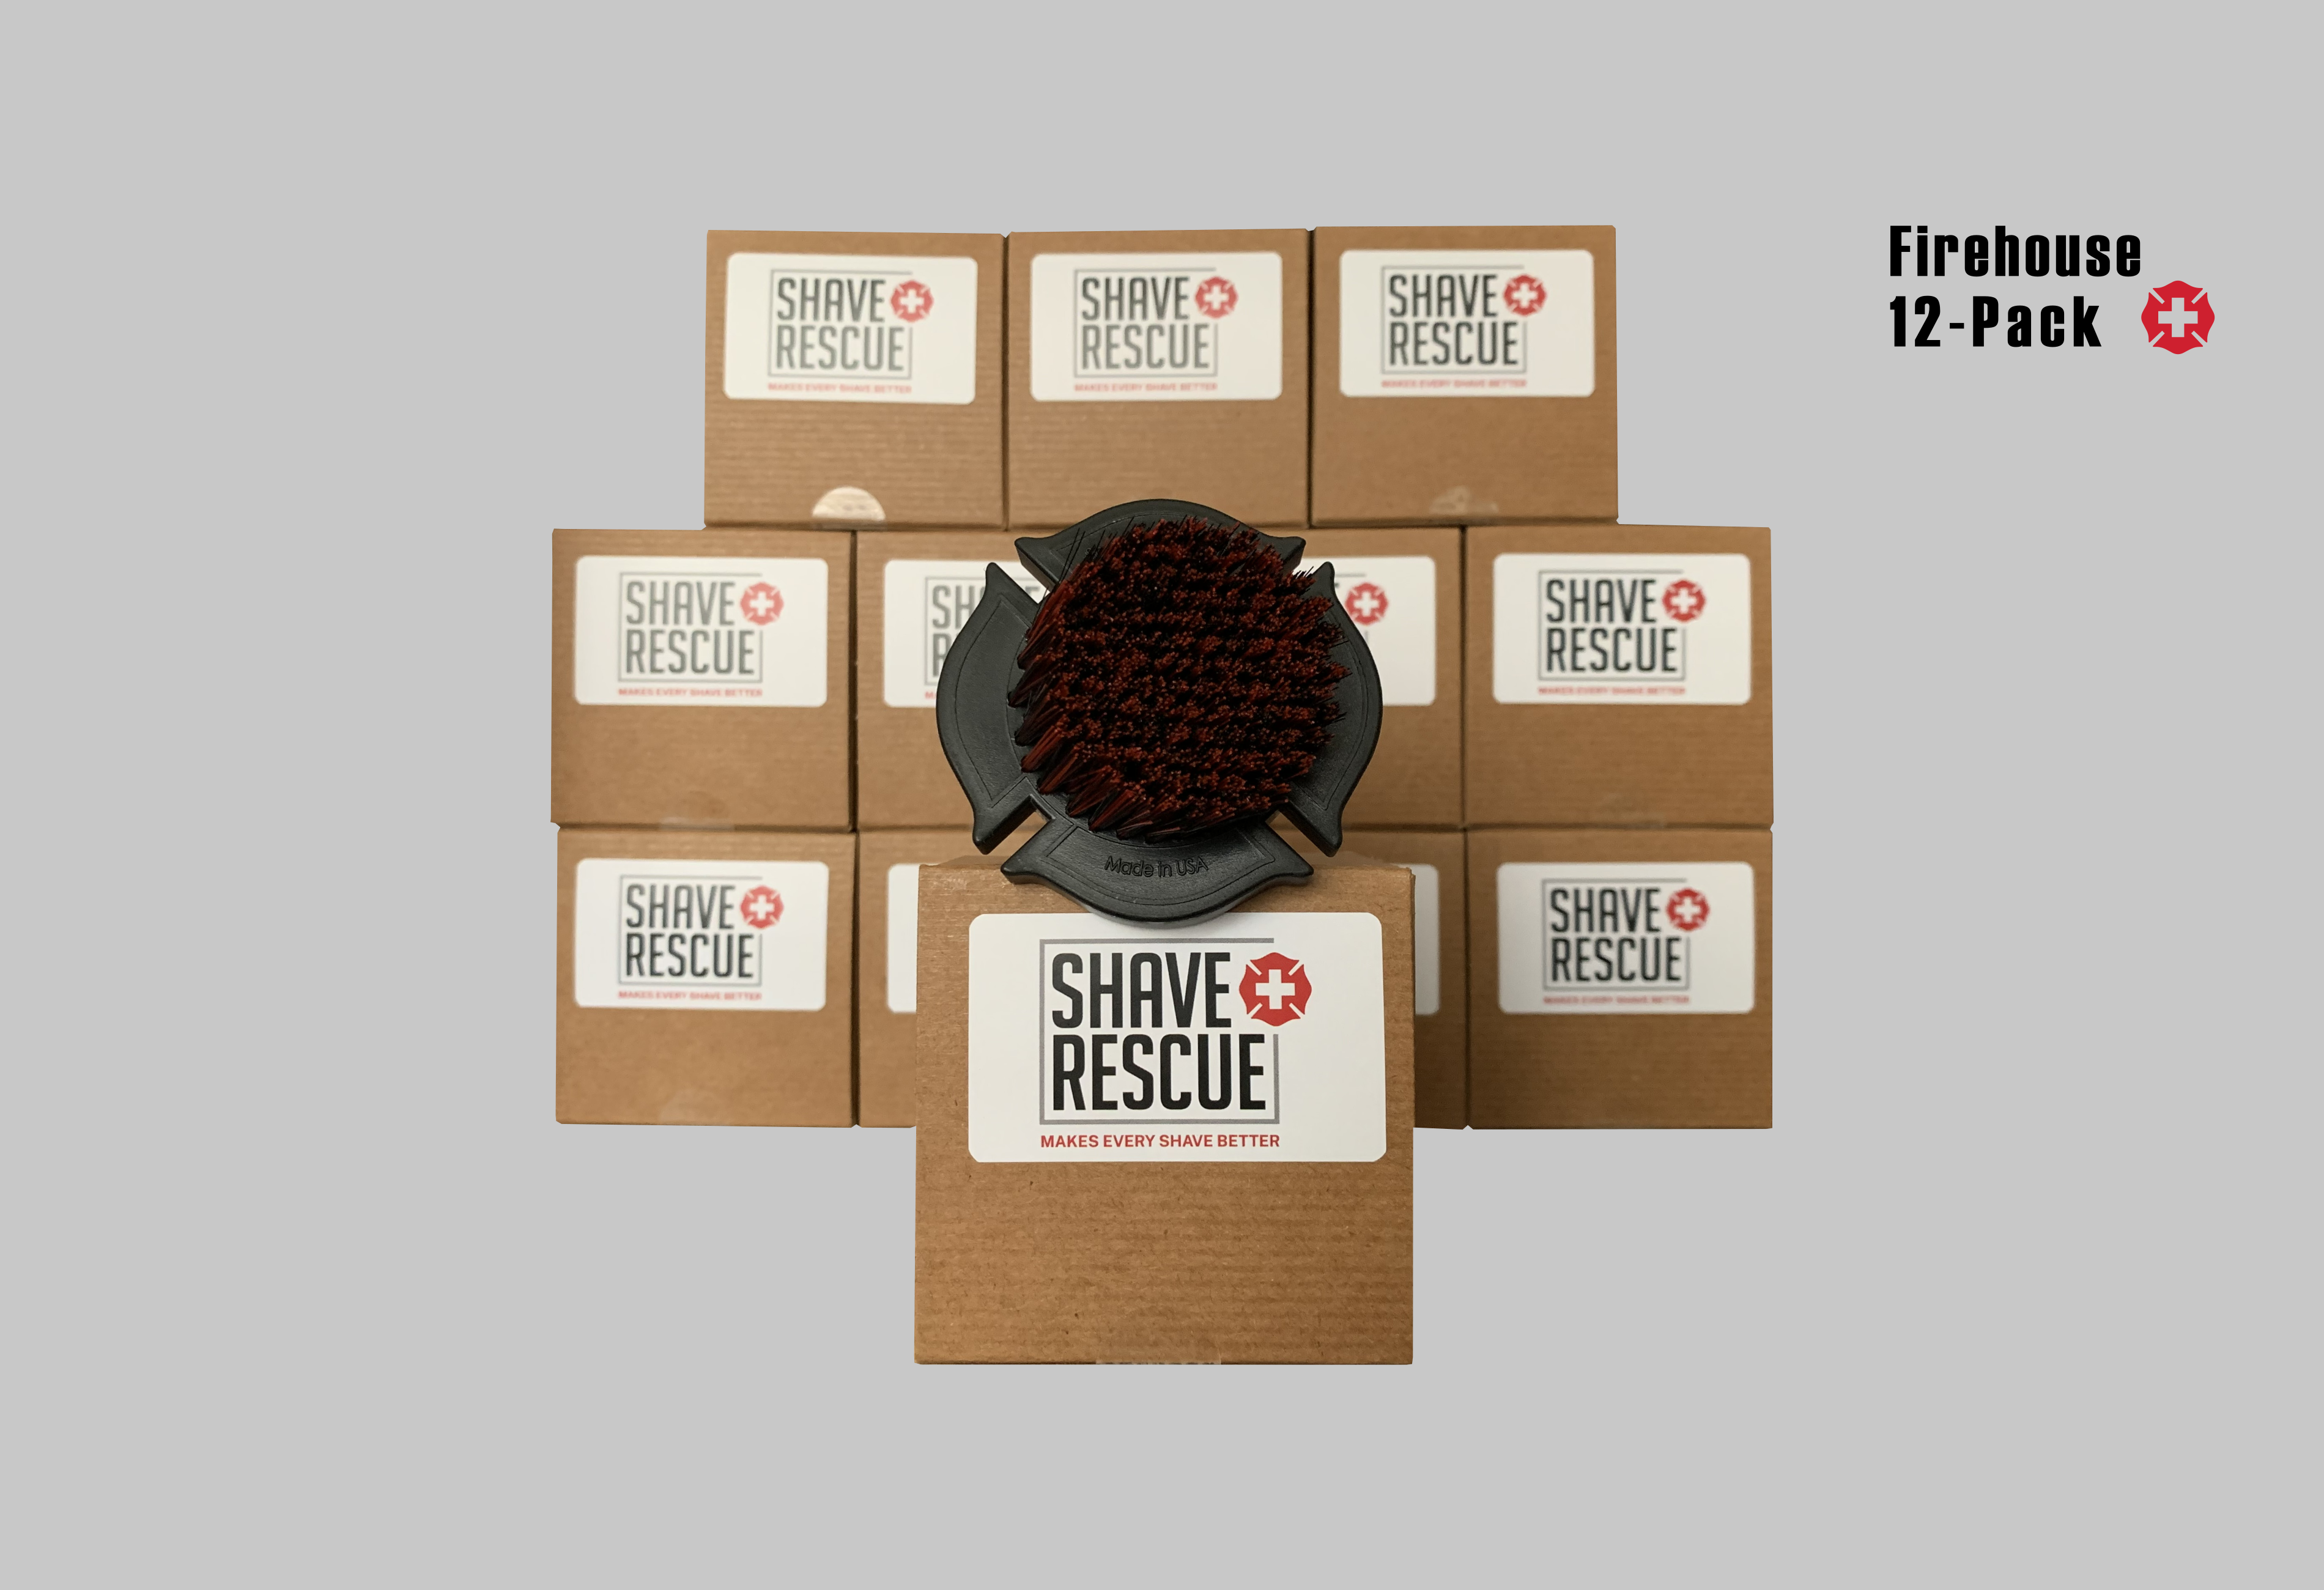 The Firehouse 12-Pack by Shave Rescue contains 12 individually packaged Original Rescue Brushes.